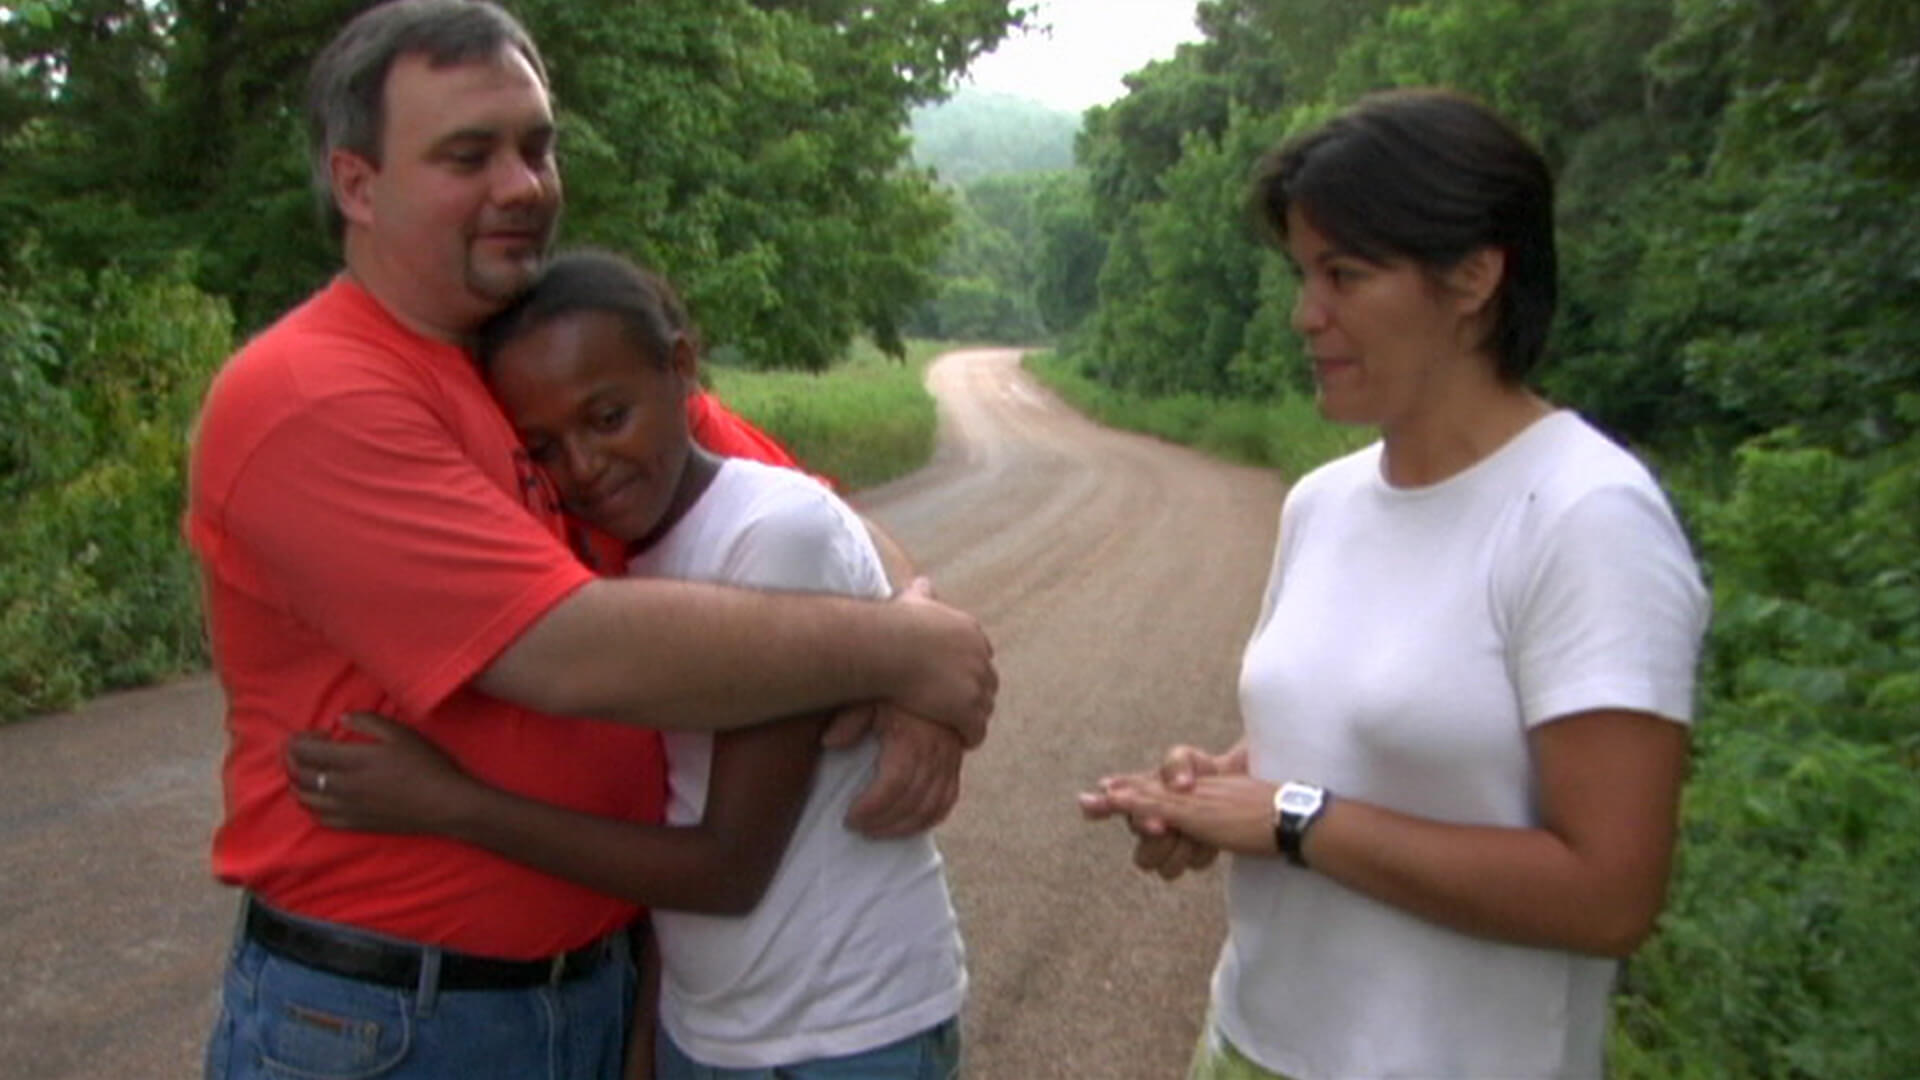 Still from Girl Adopted. A man and an adolescent girl are hugging, and a woman is watching them. Behind them is seen a winding dirt road, flanked by greenery on both sides.